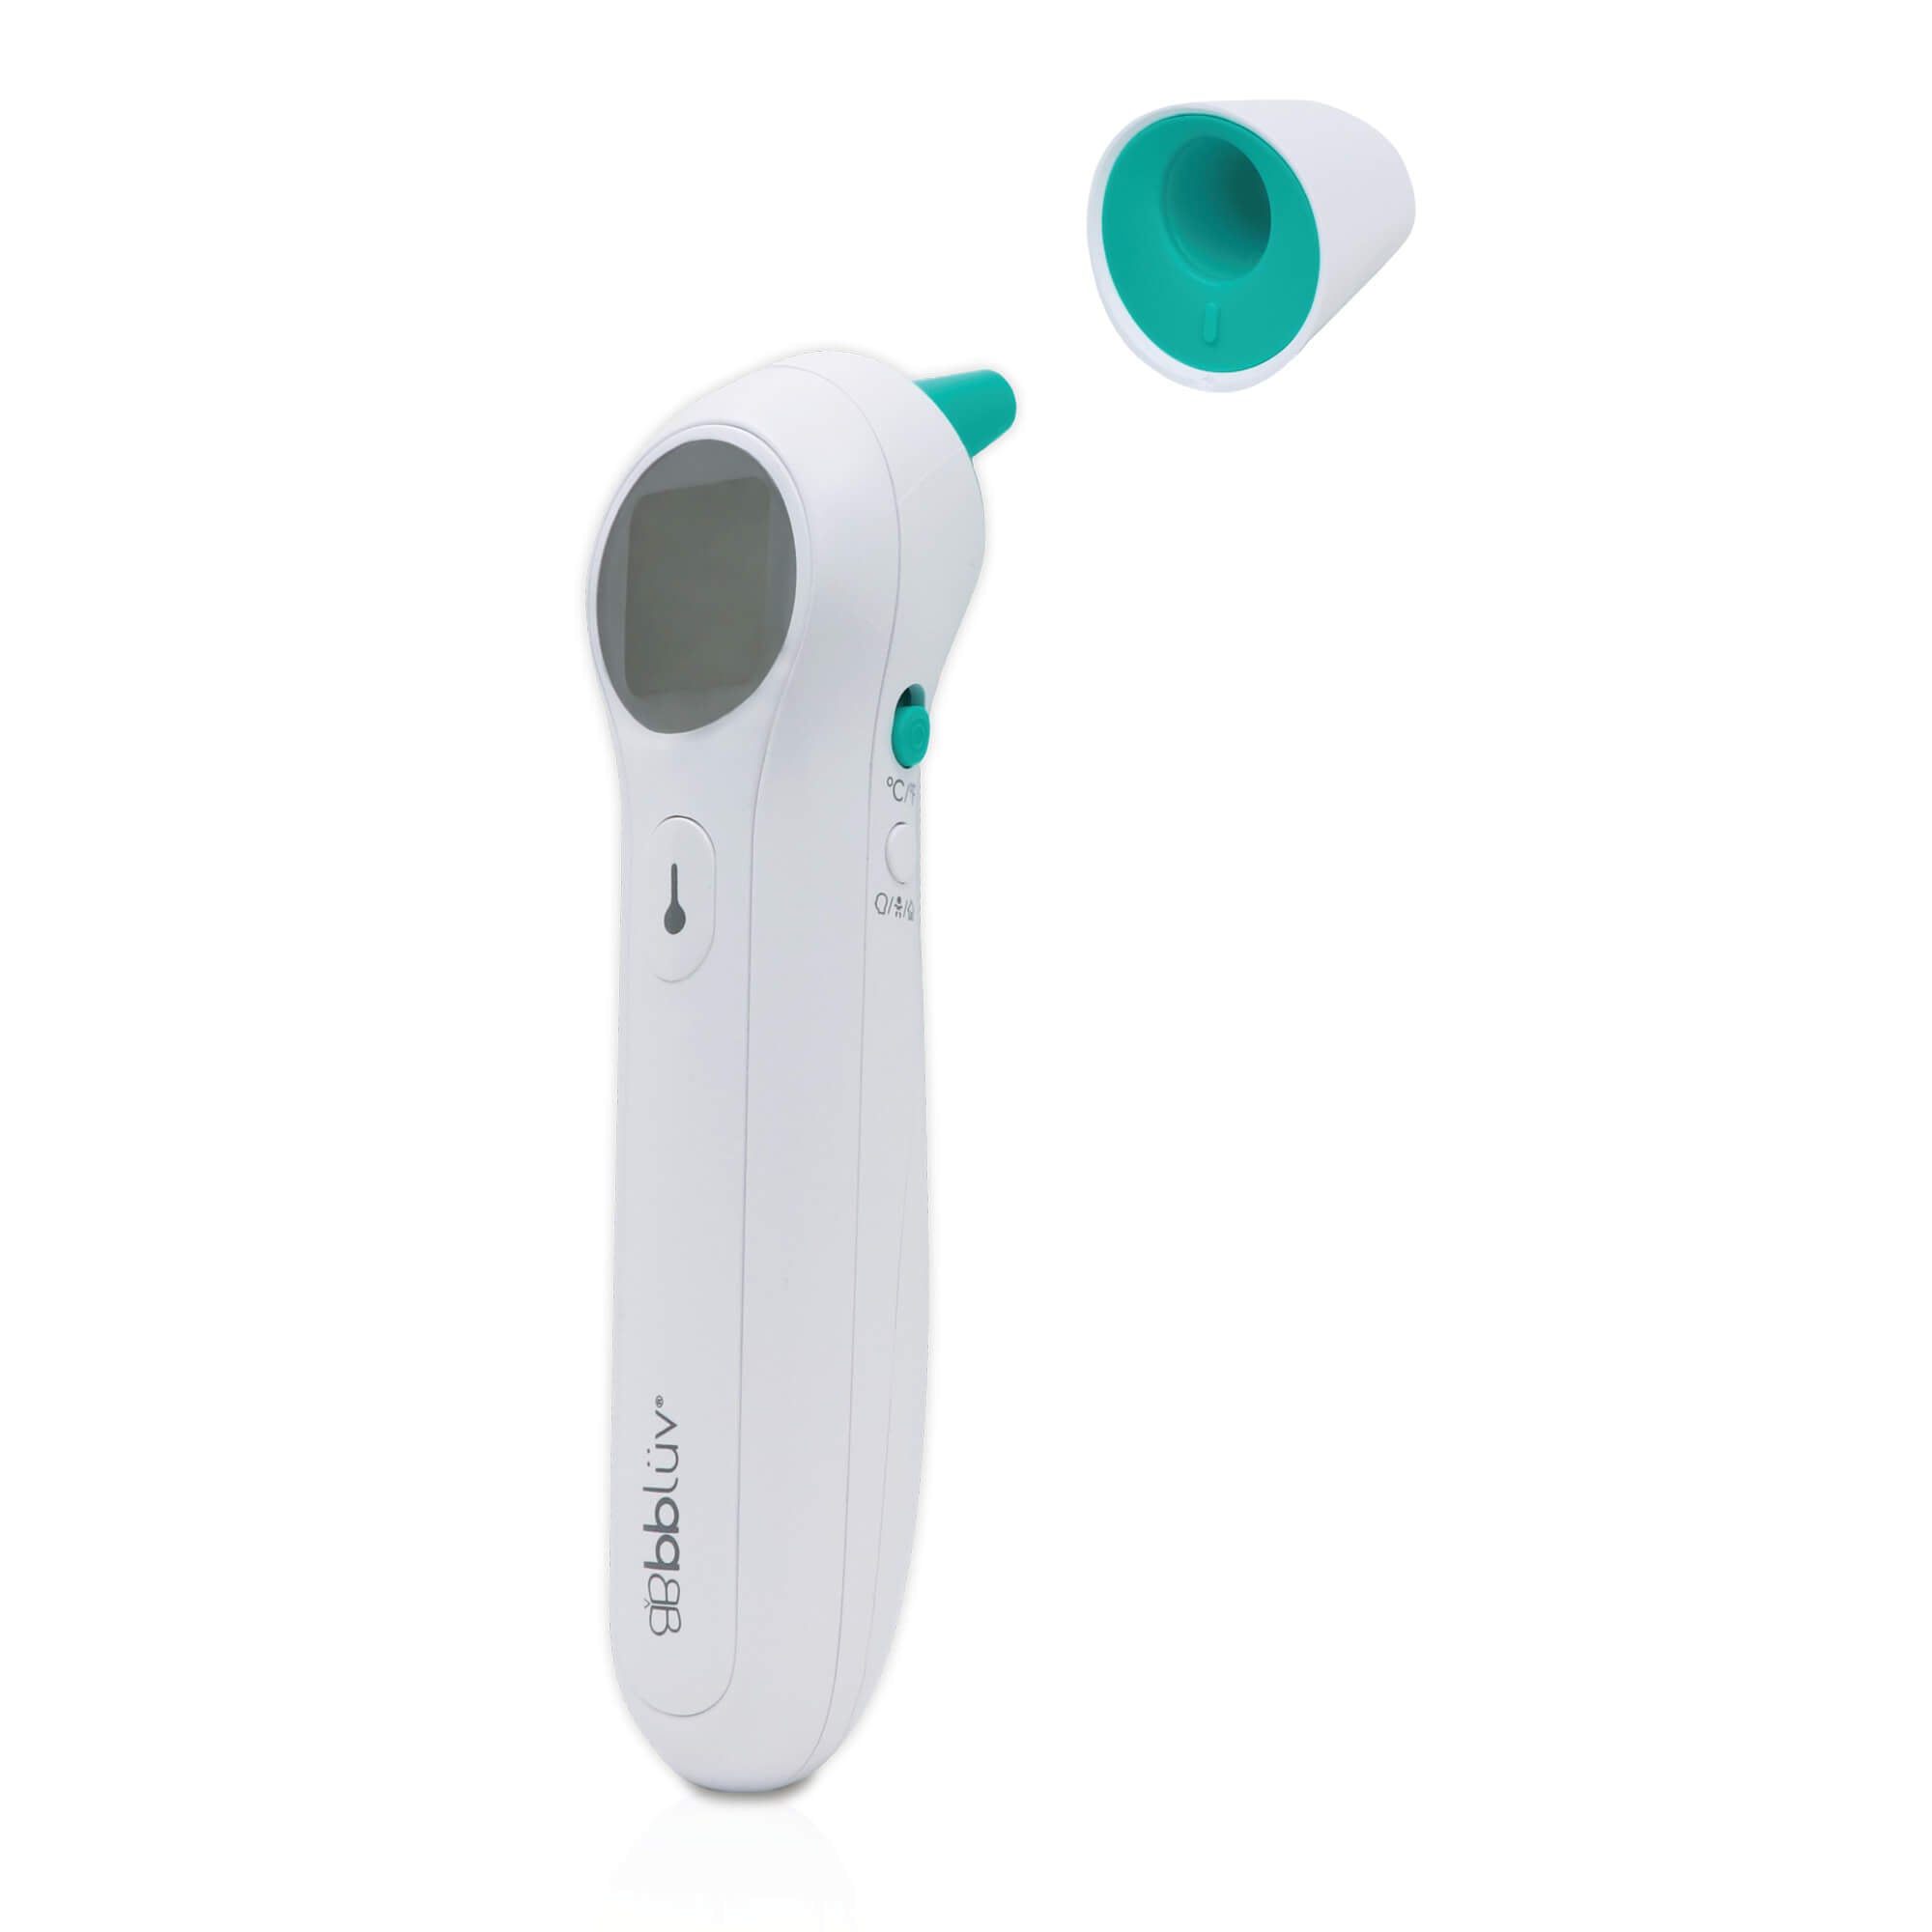 Orä: 5-in-1 Ear & Infrared Digital Thermometer || Orä: Thermomètre 5 en 1 infrarouge pour la famille